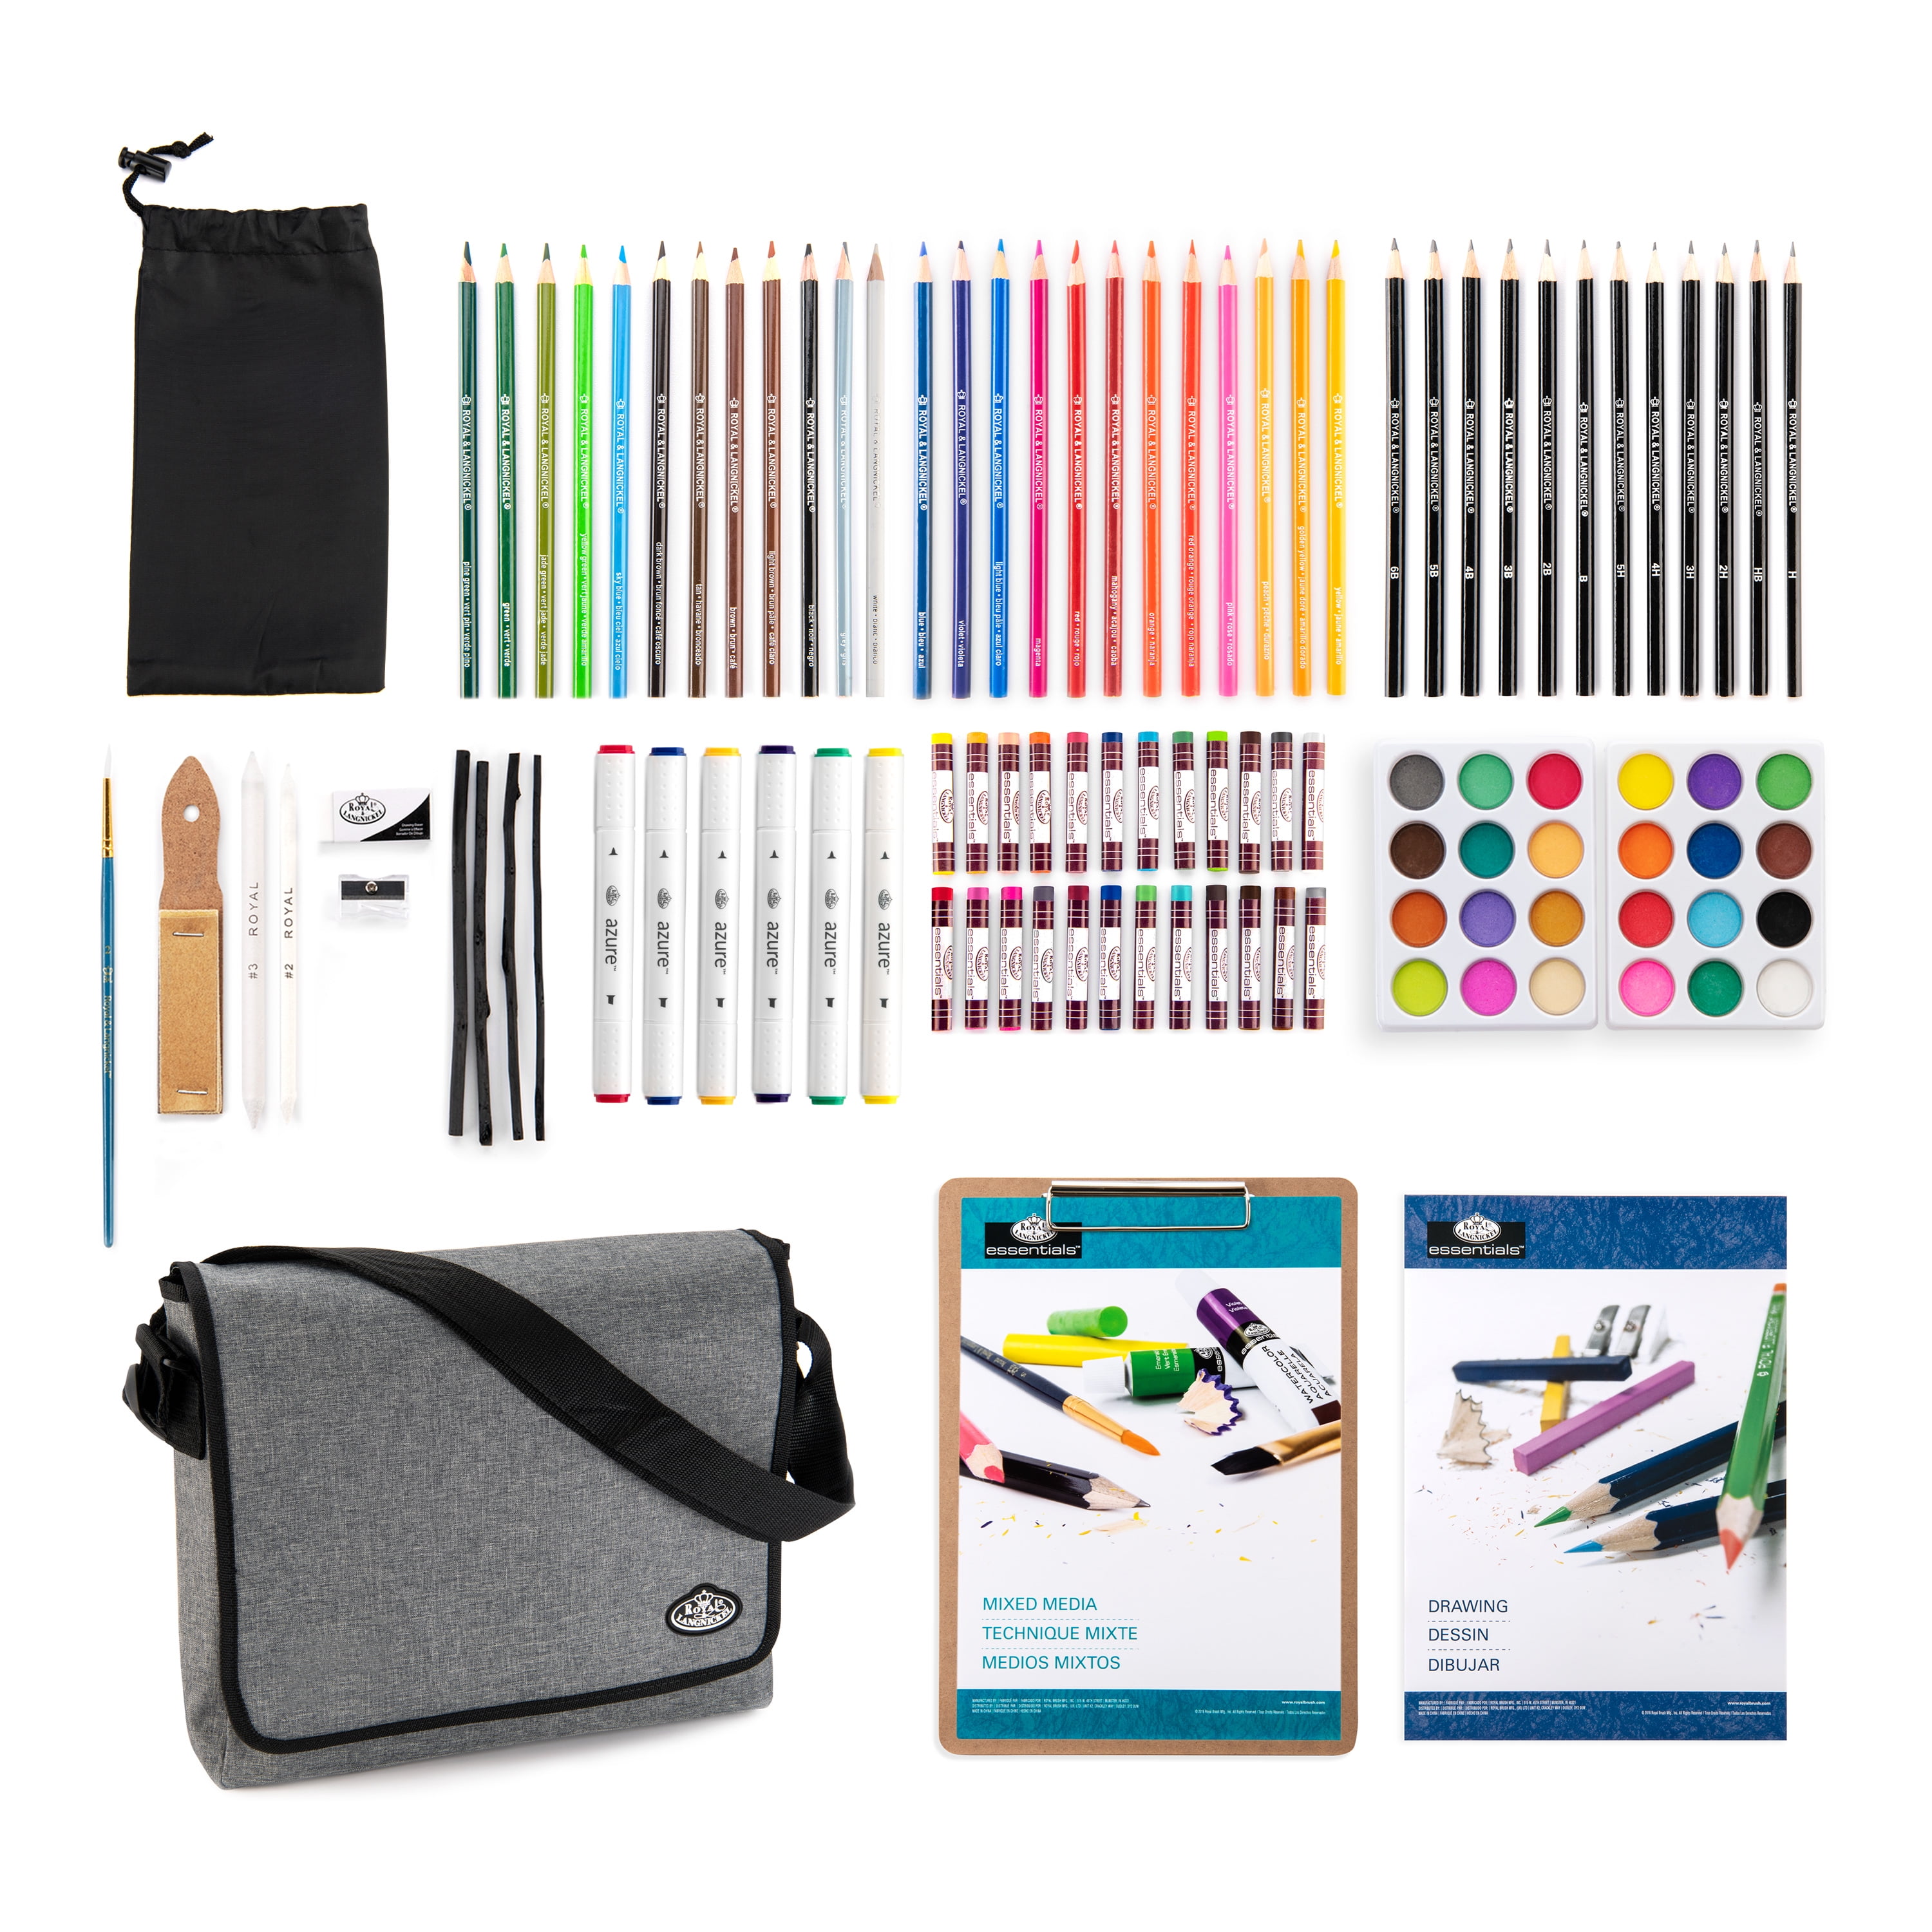 Royal & Langnickel Essentials - 165pc Sketch & Draw Art Set with Travel Bag for All Ages